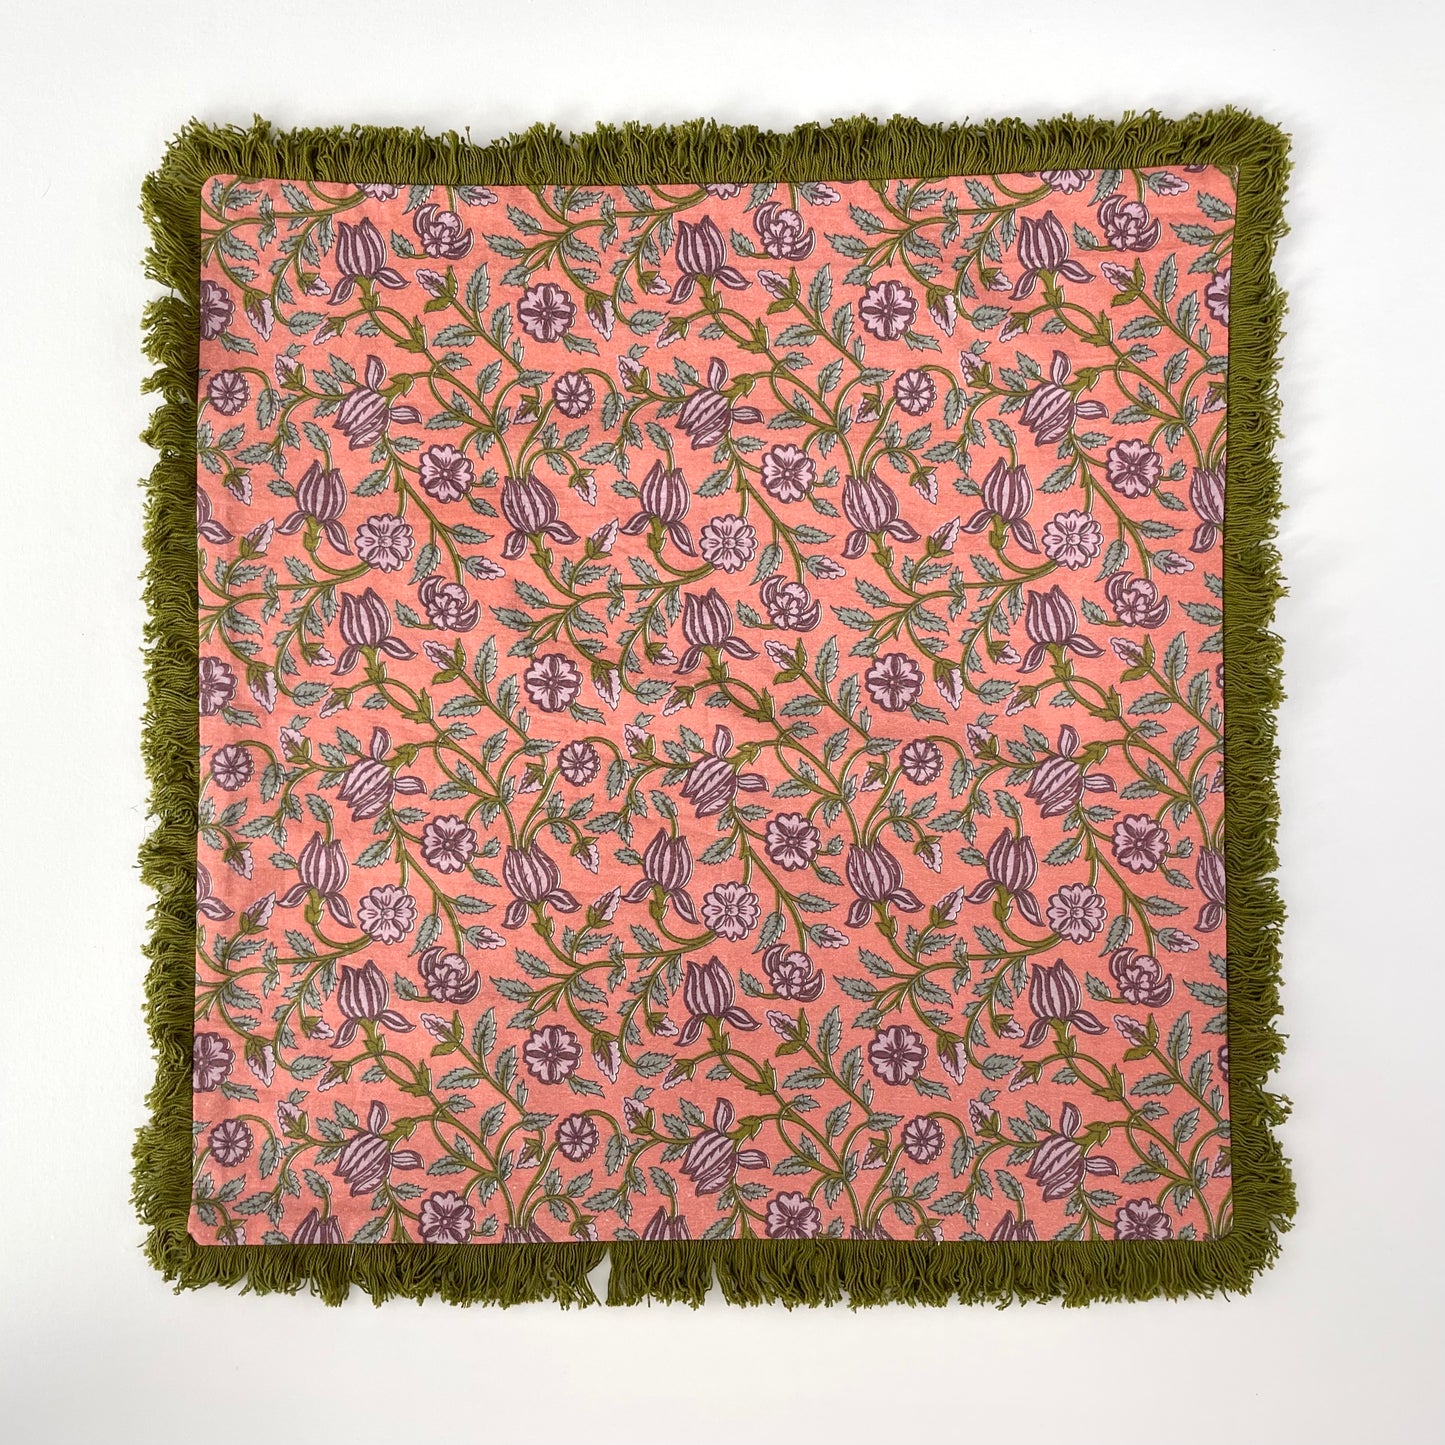 18x18 block printed 100% cotton fringed pillow cover - pink & green vintage floral